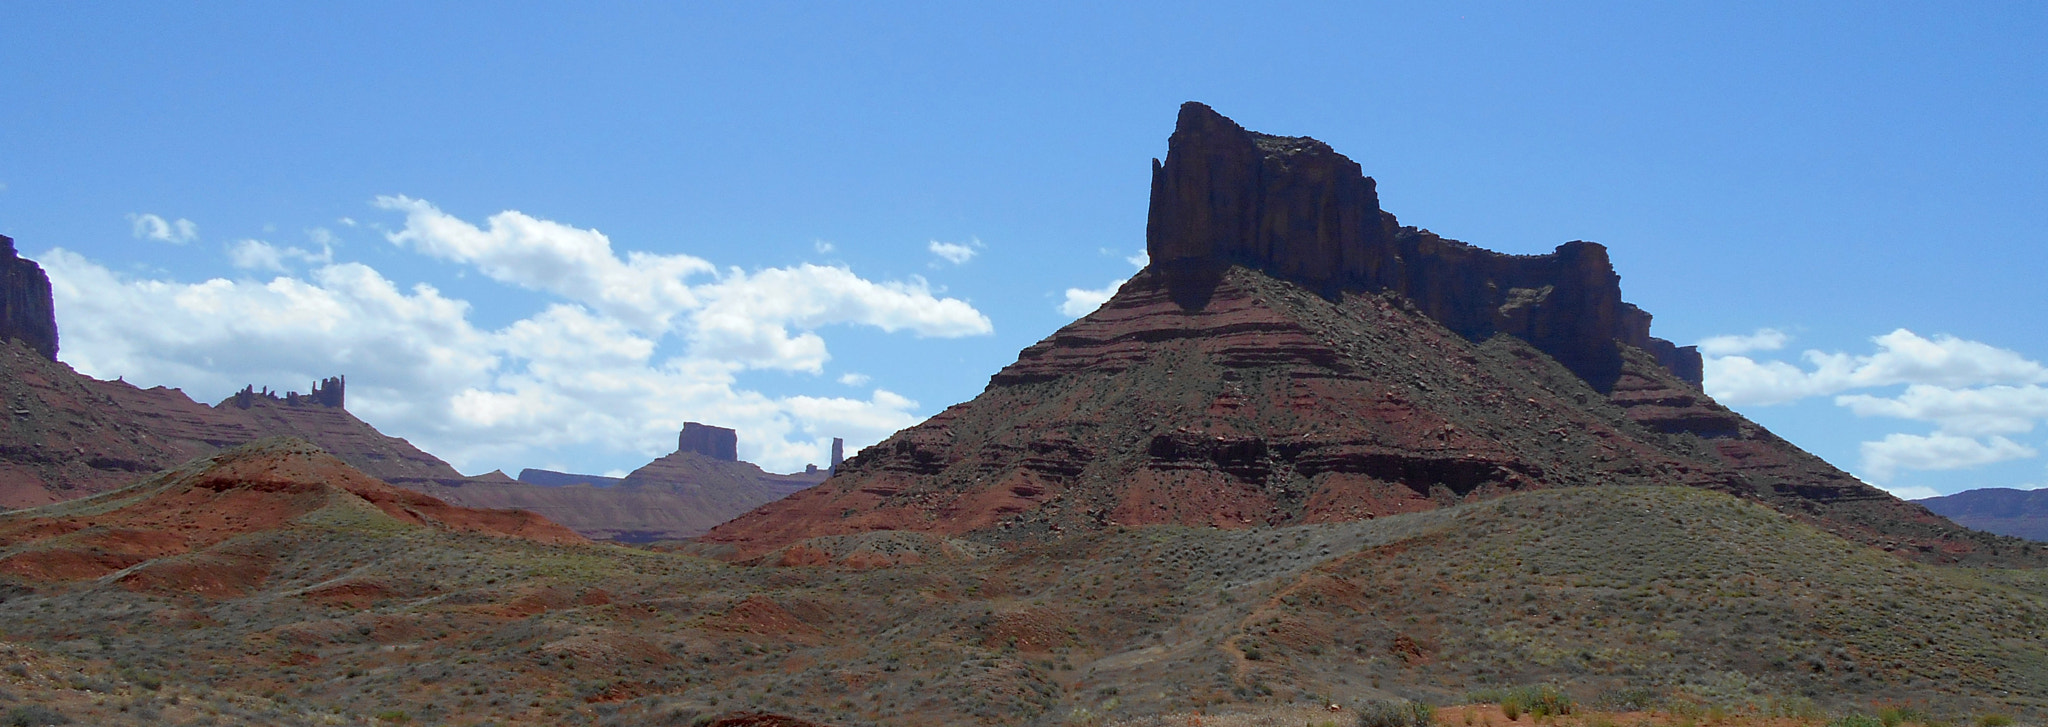 Nikon COOLPIX L30 sample photo. Valley of moab photography